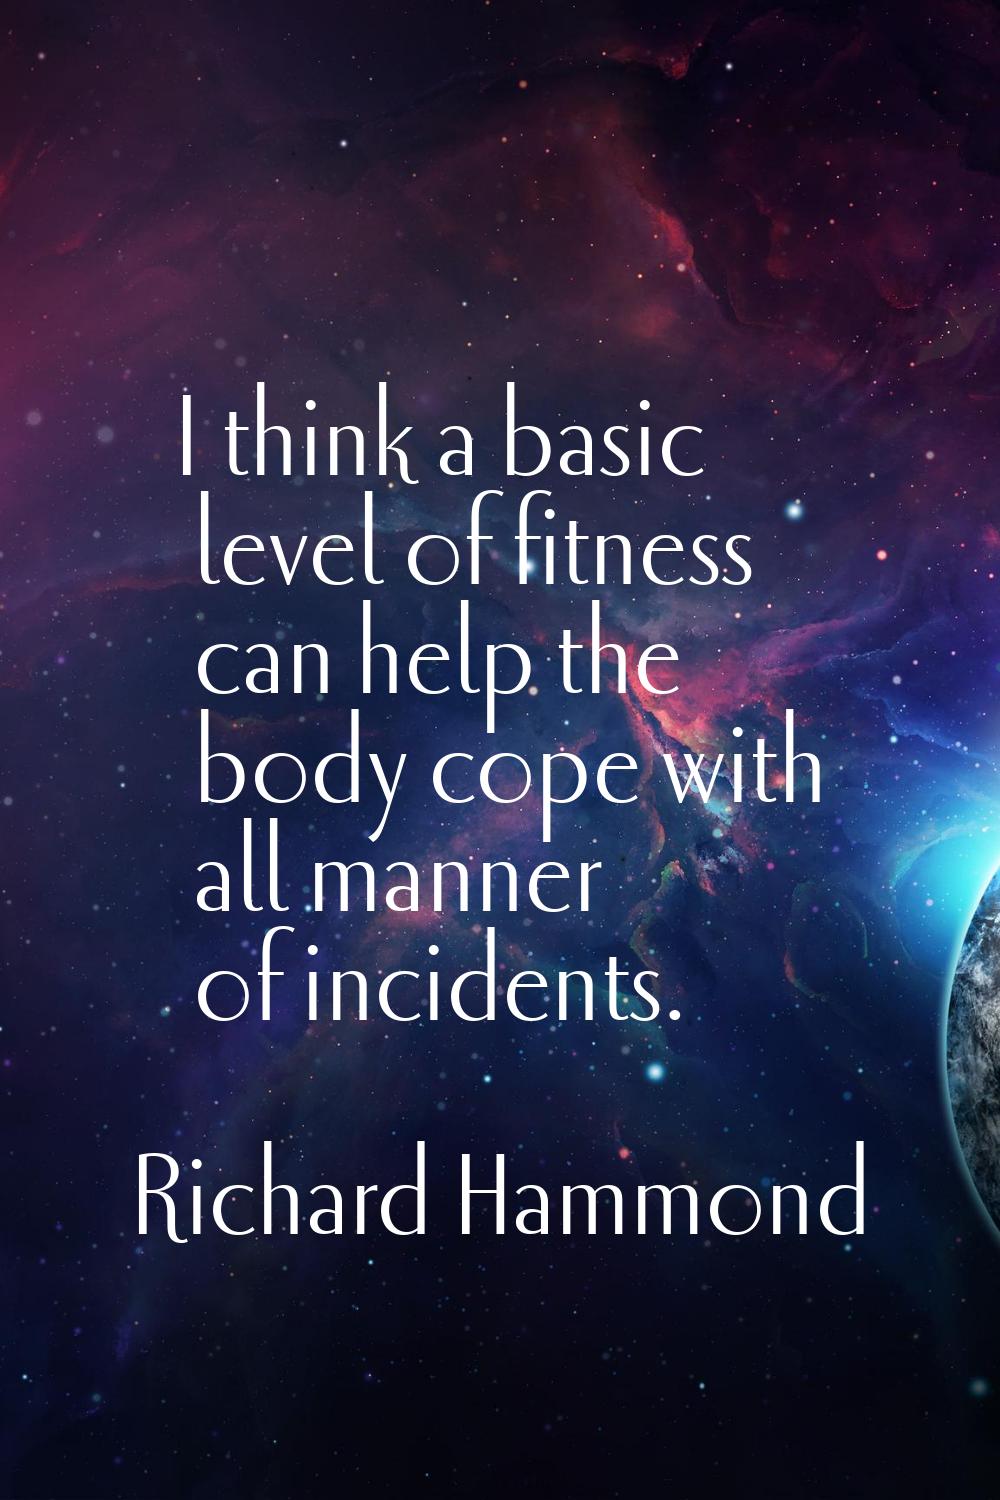 I think a basic level of fitness can help the body cope with all manner of incidents.